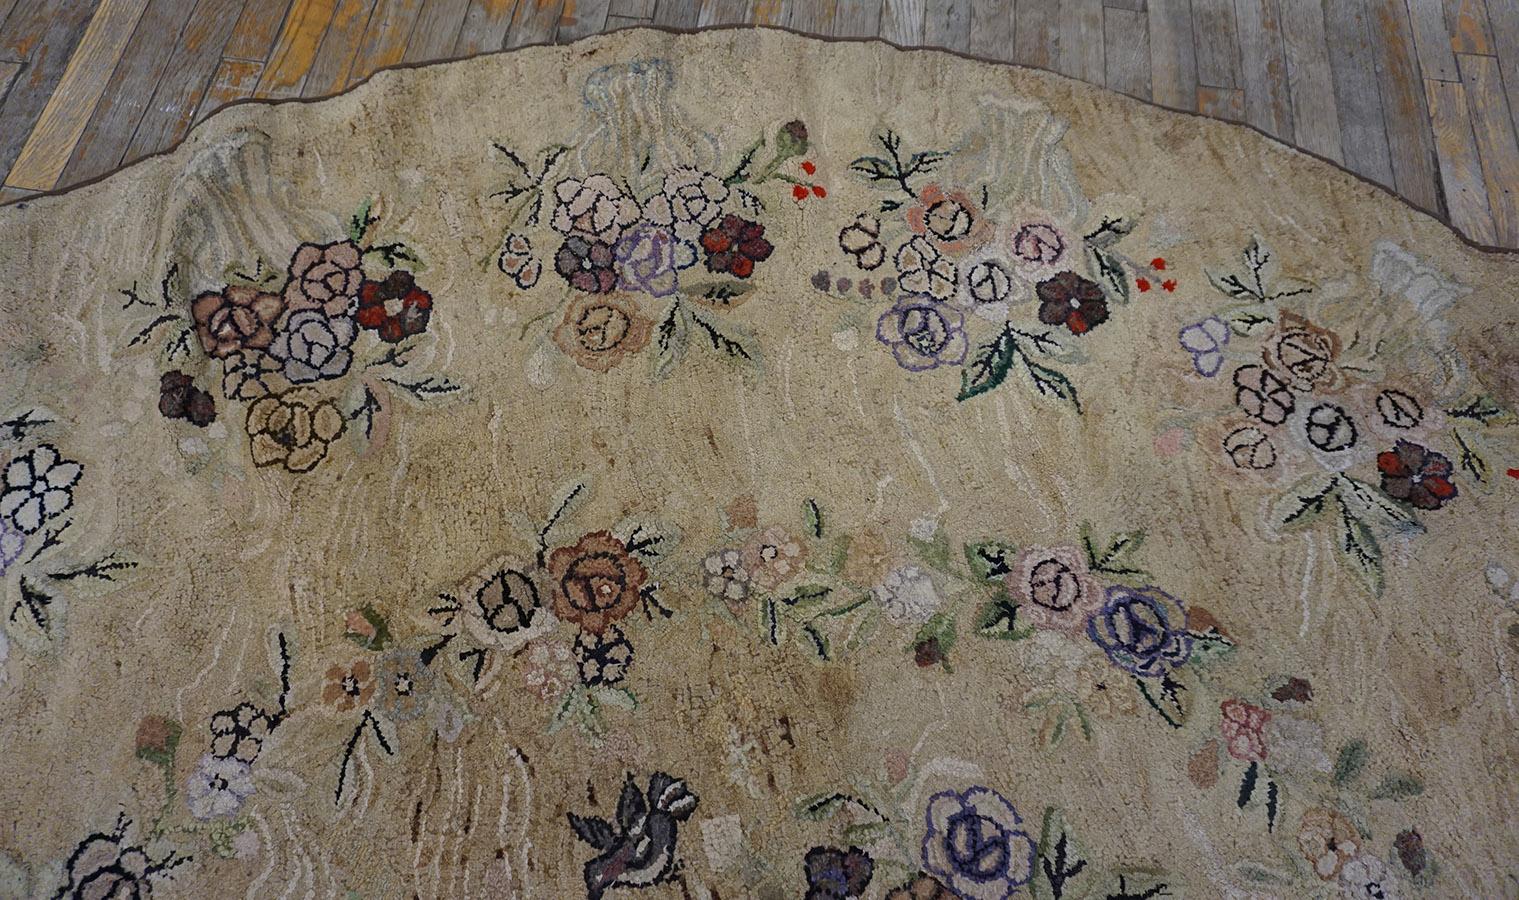 Early 20th Century American Hooked Rug ( 9' x 9' - 275 x 275 ) In Good Condition For Sale In New York, NY